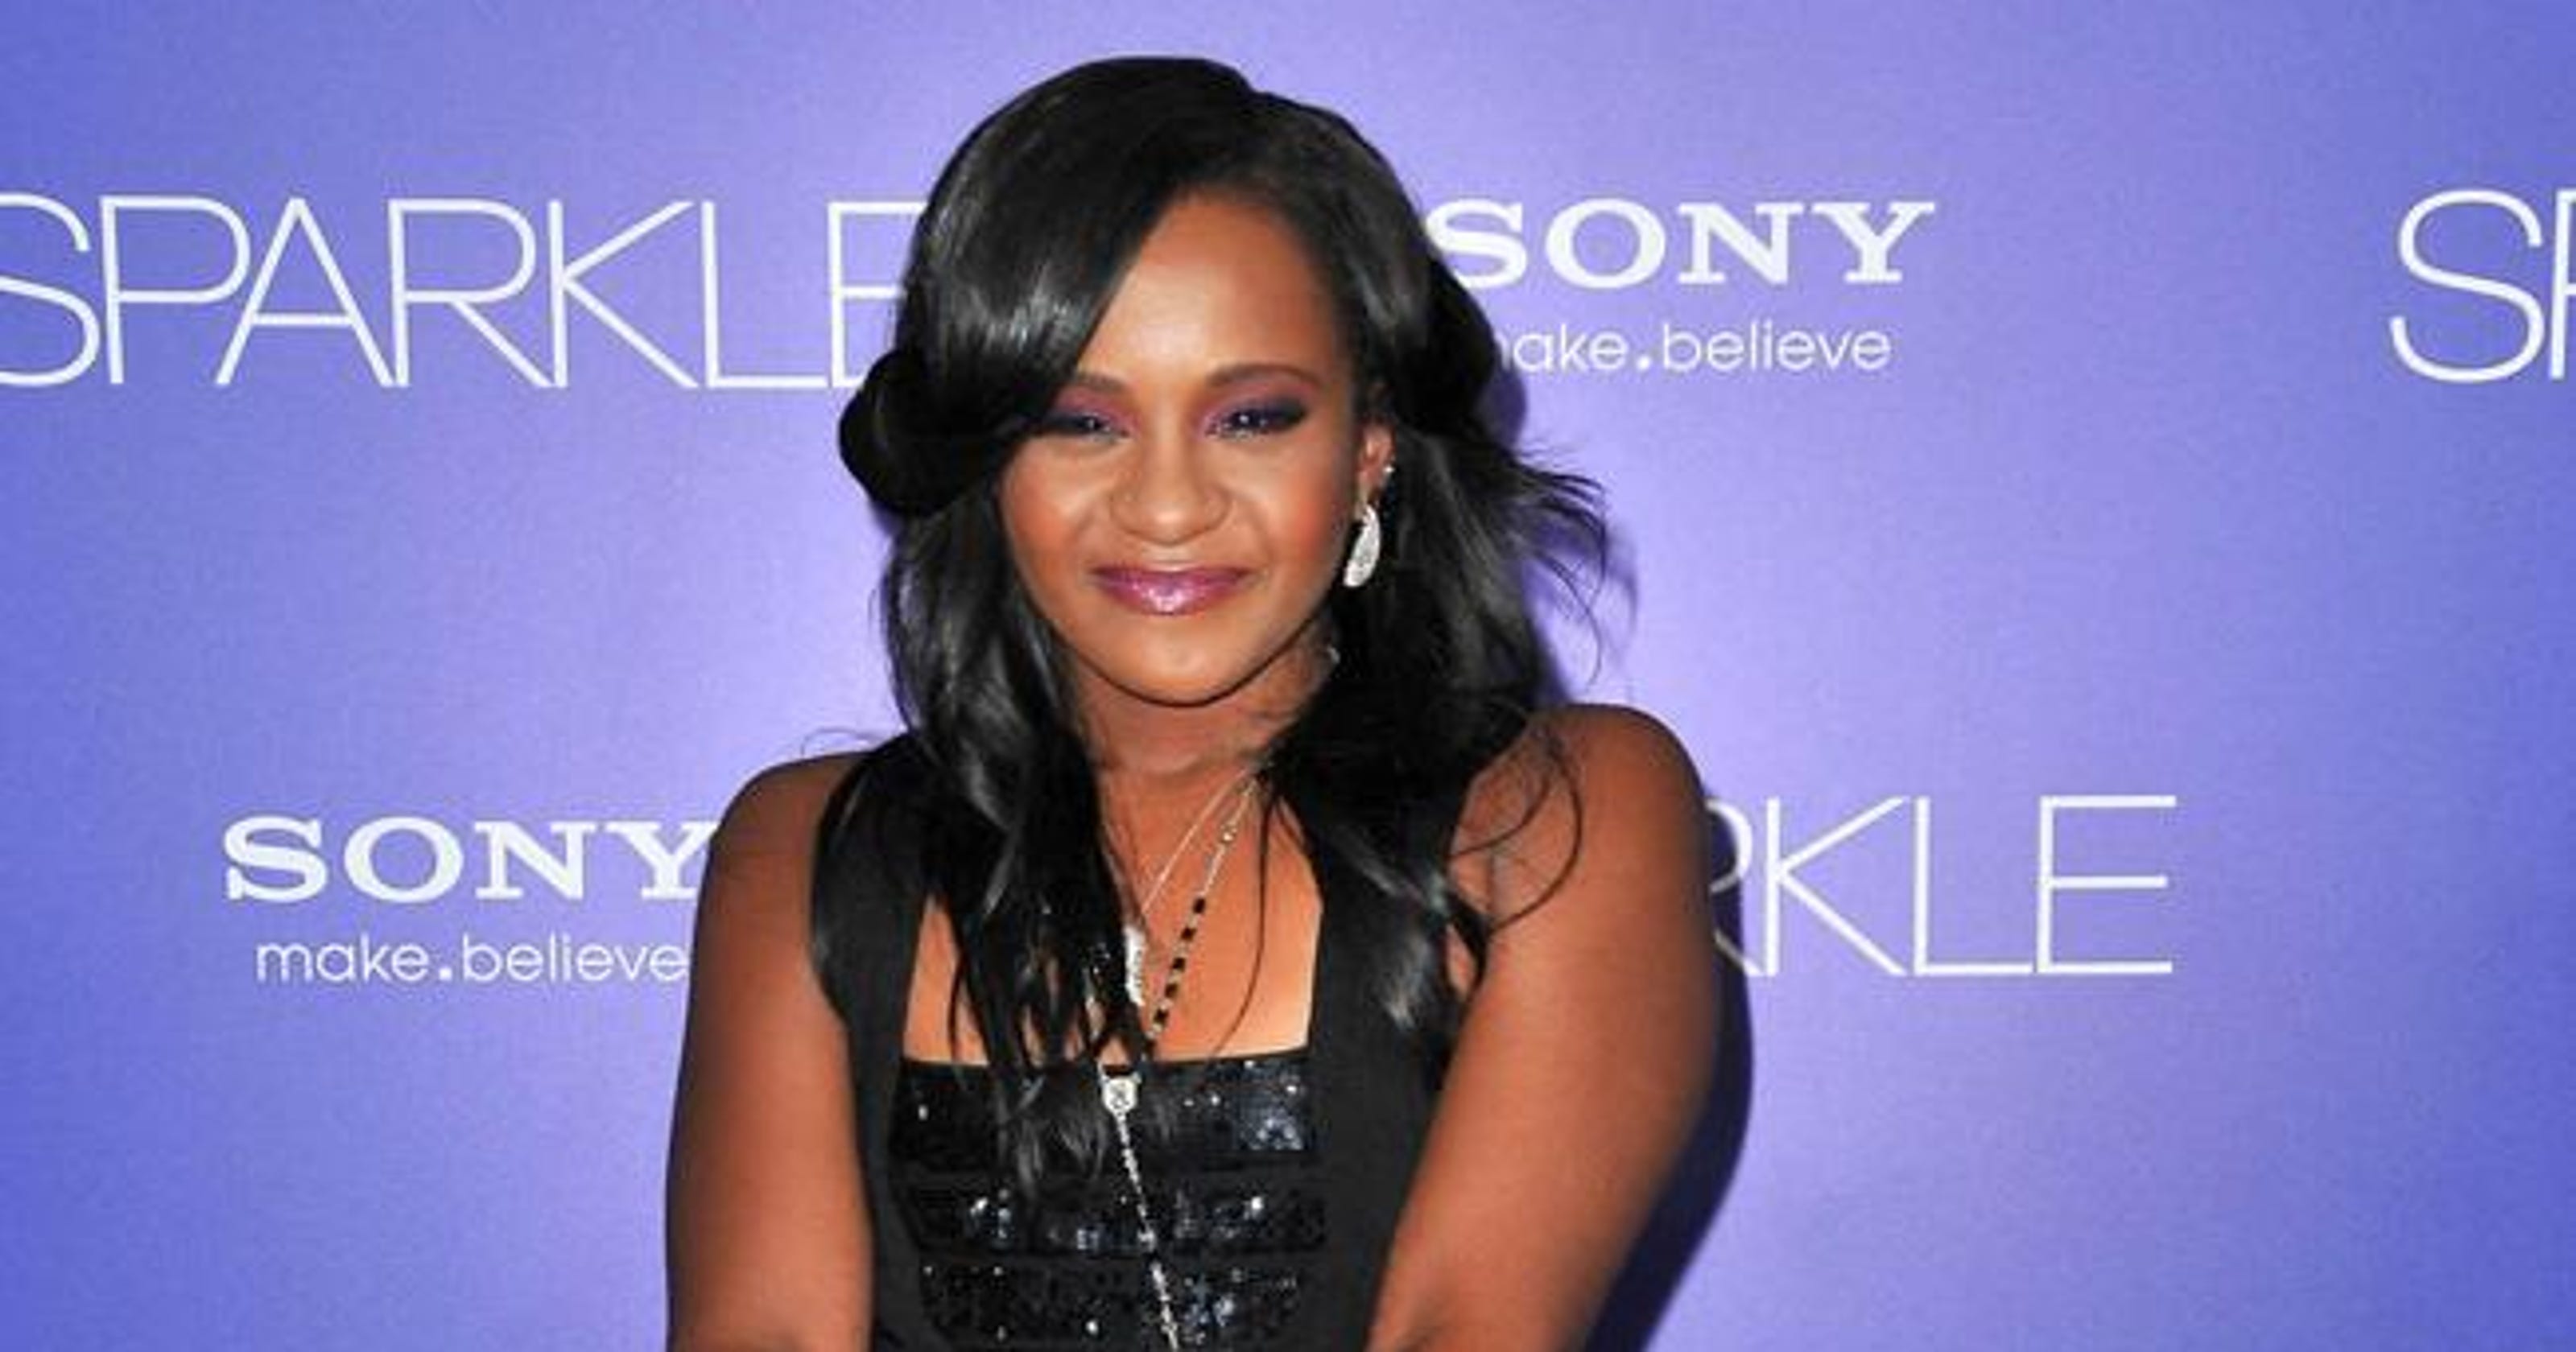 1980s Porn Stars With Joey Silv Lady - Photo of Bobbi Kristina Brown in casket leaked?